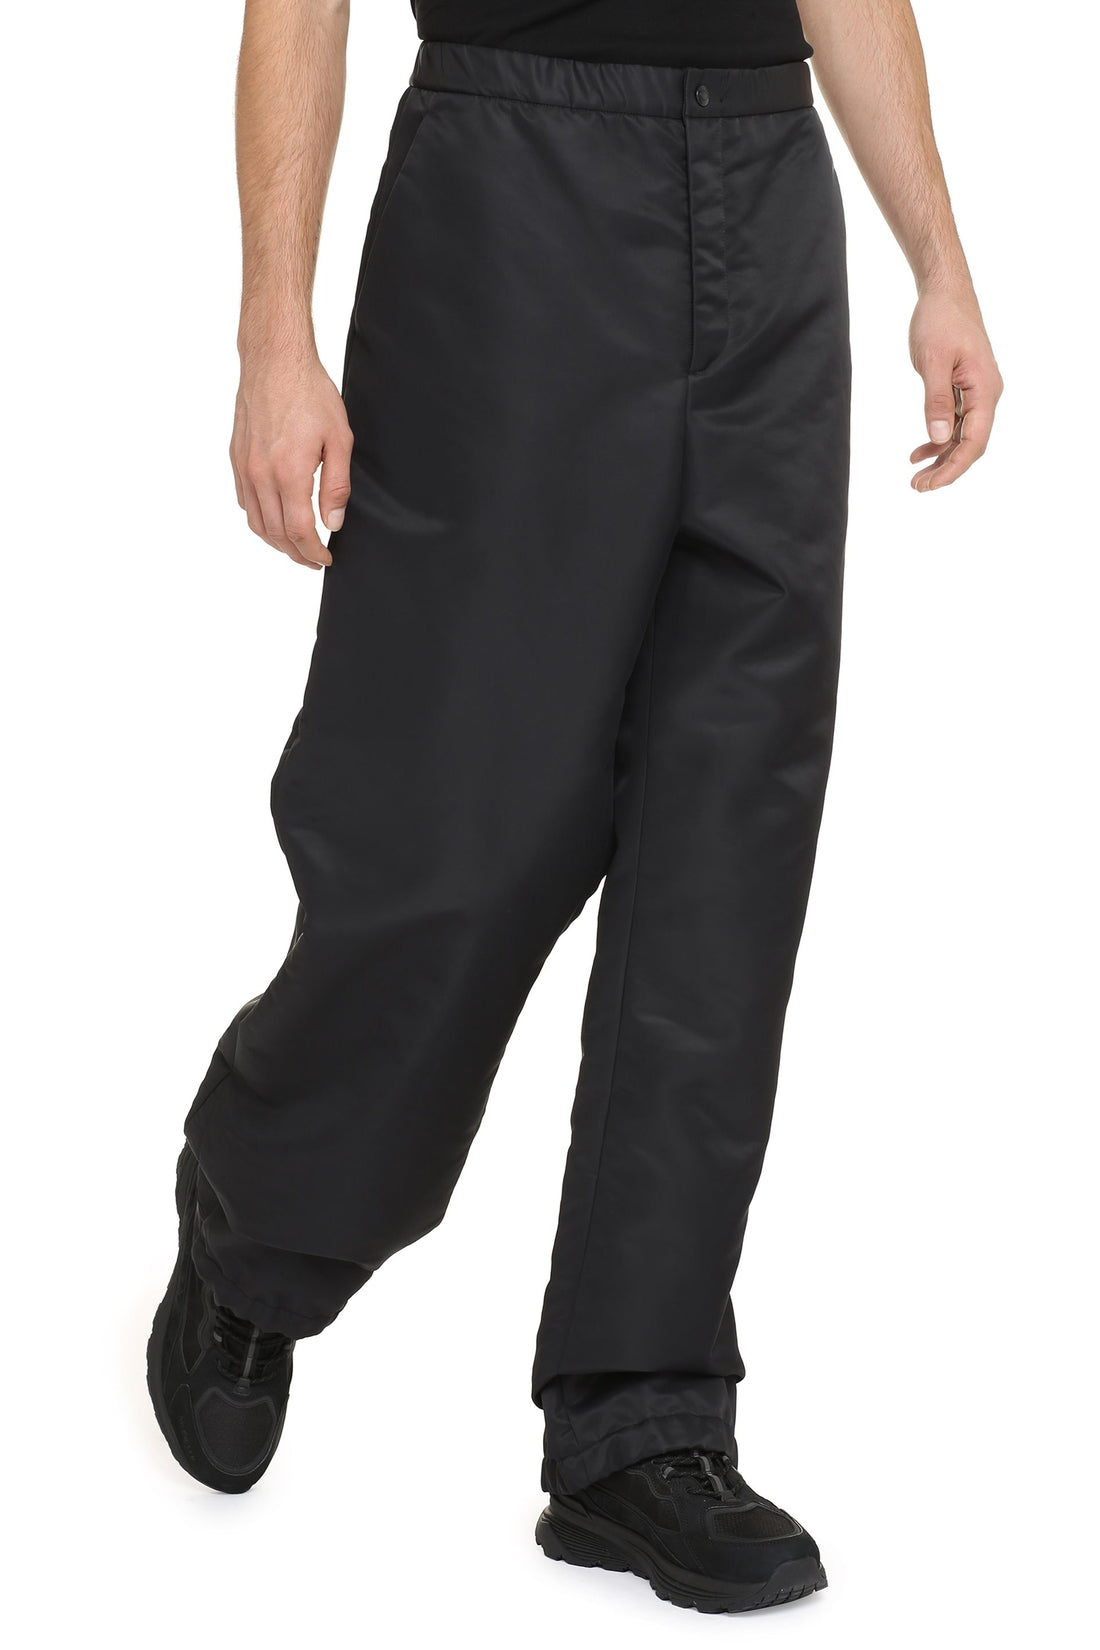 Valentino-OUTLET-SALE-Padded nylon trousers-ARCHIVIST